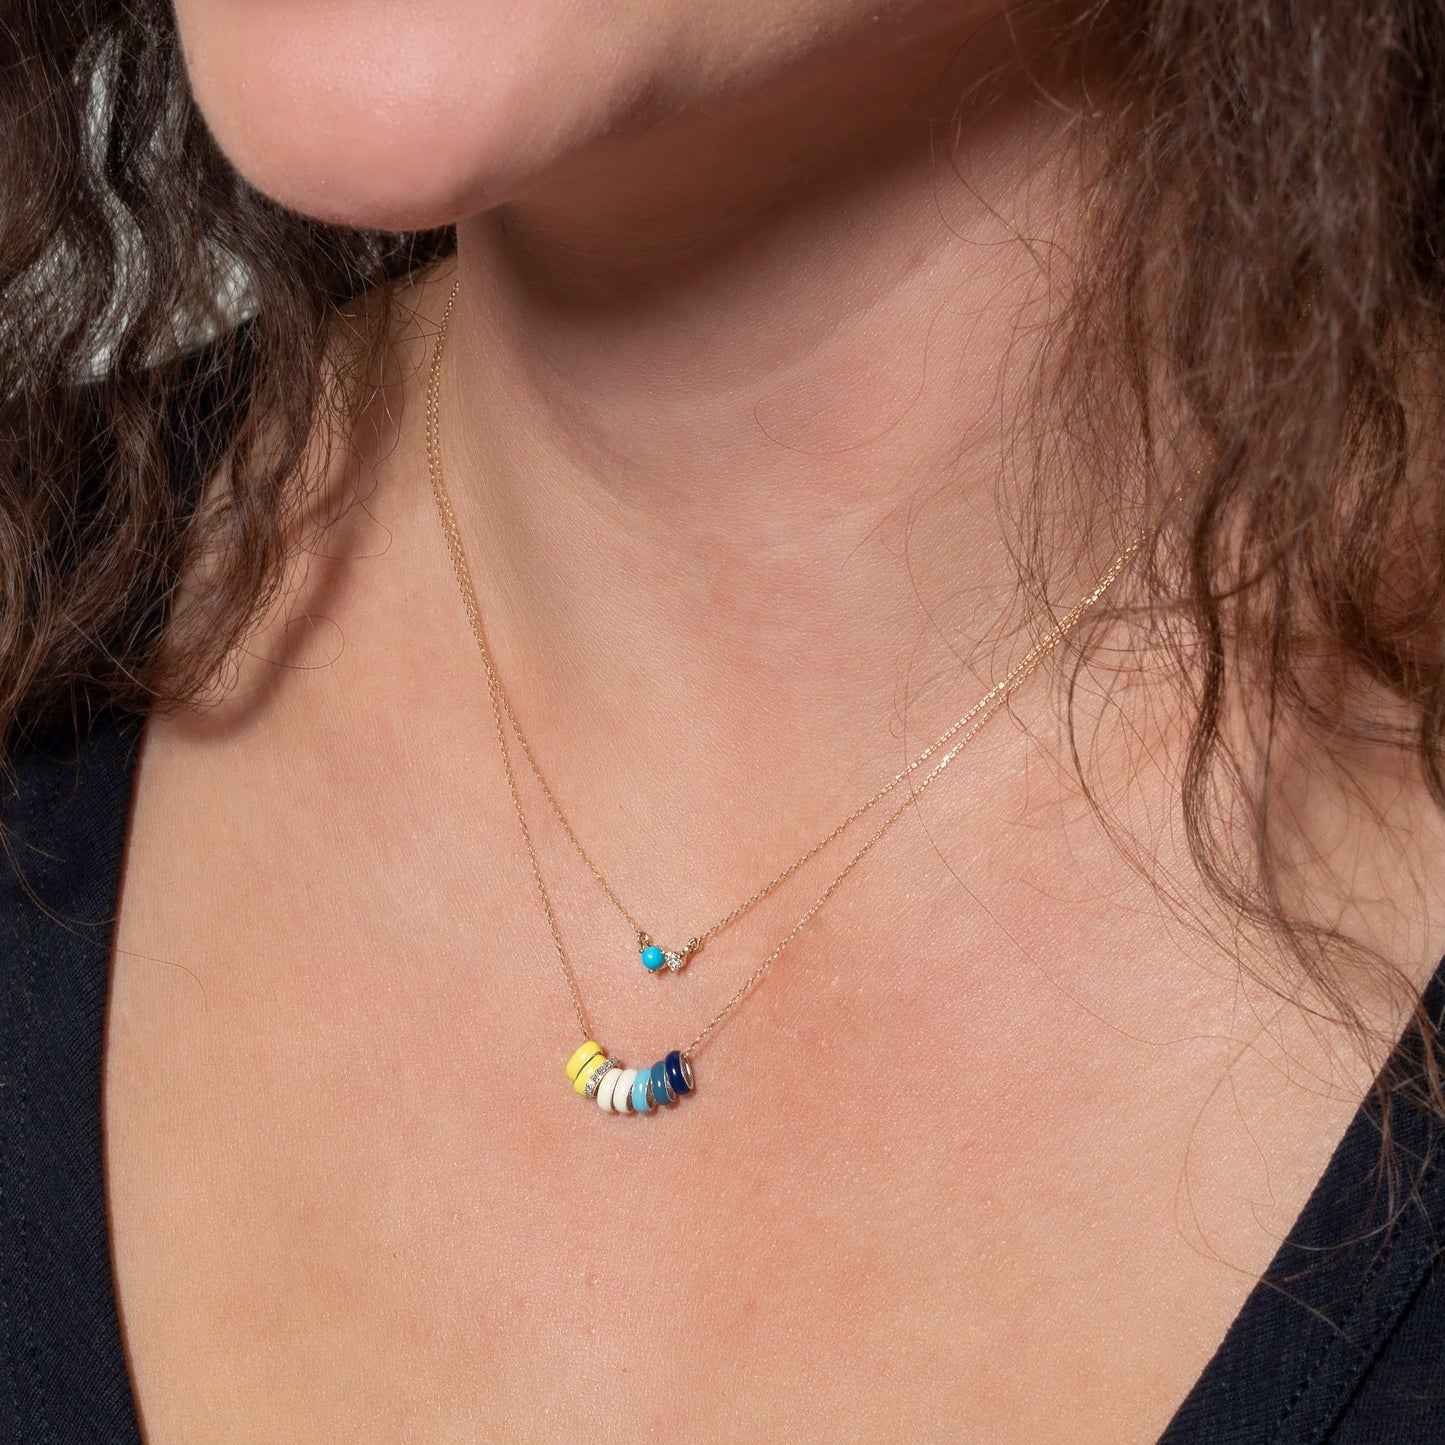 Turquoise + Diamond Amigos Necklace in Y14k